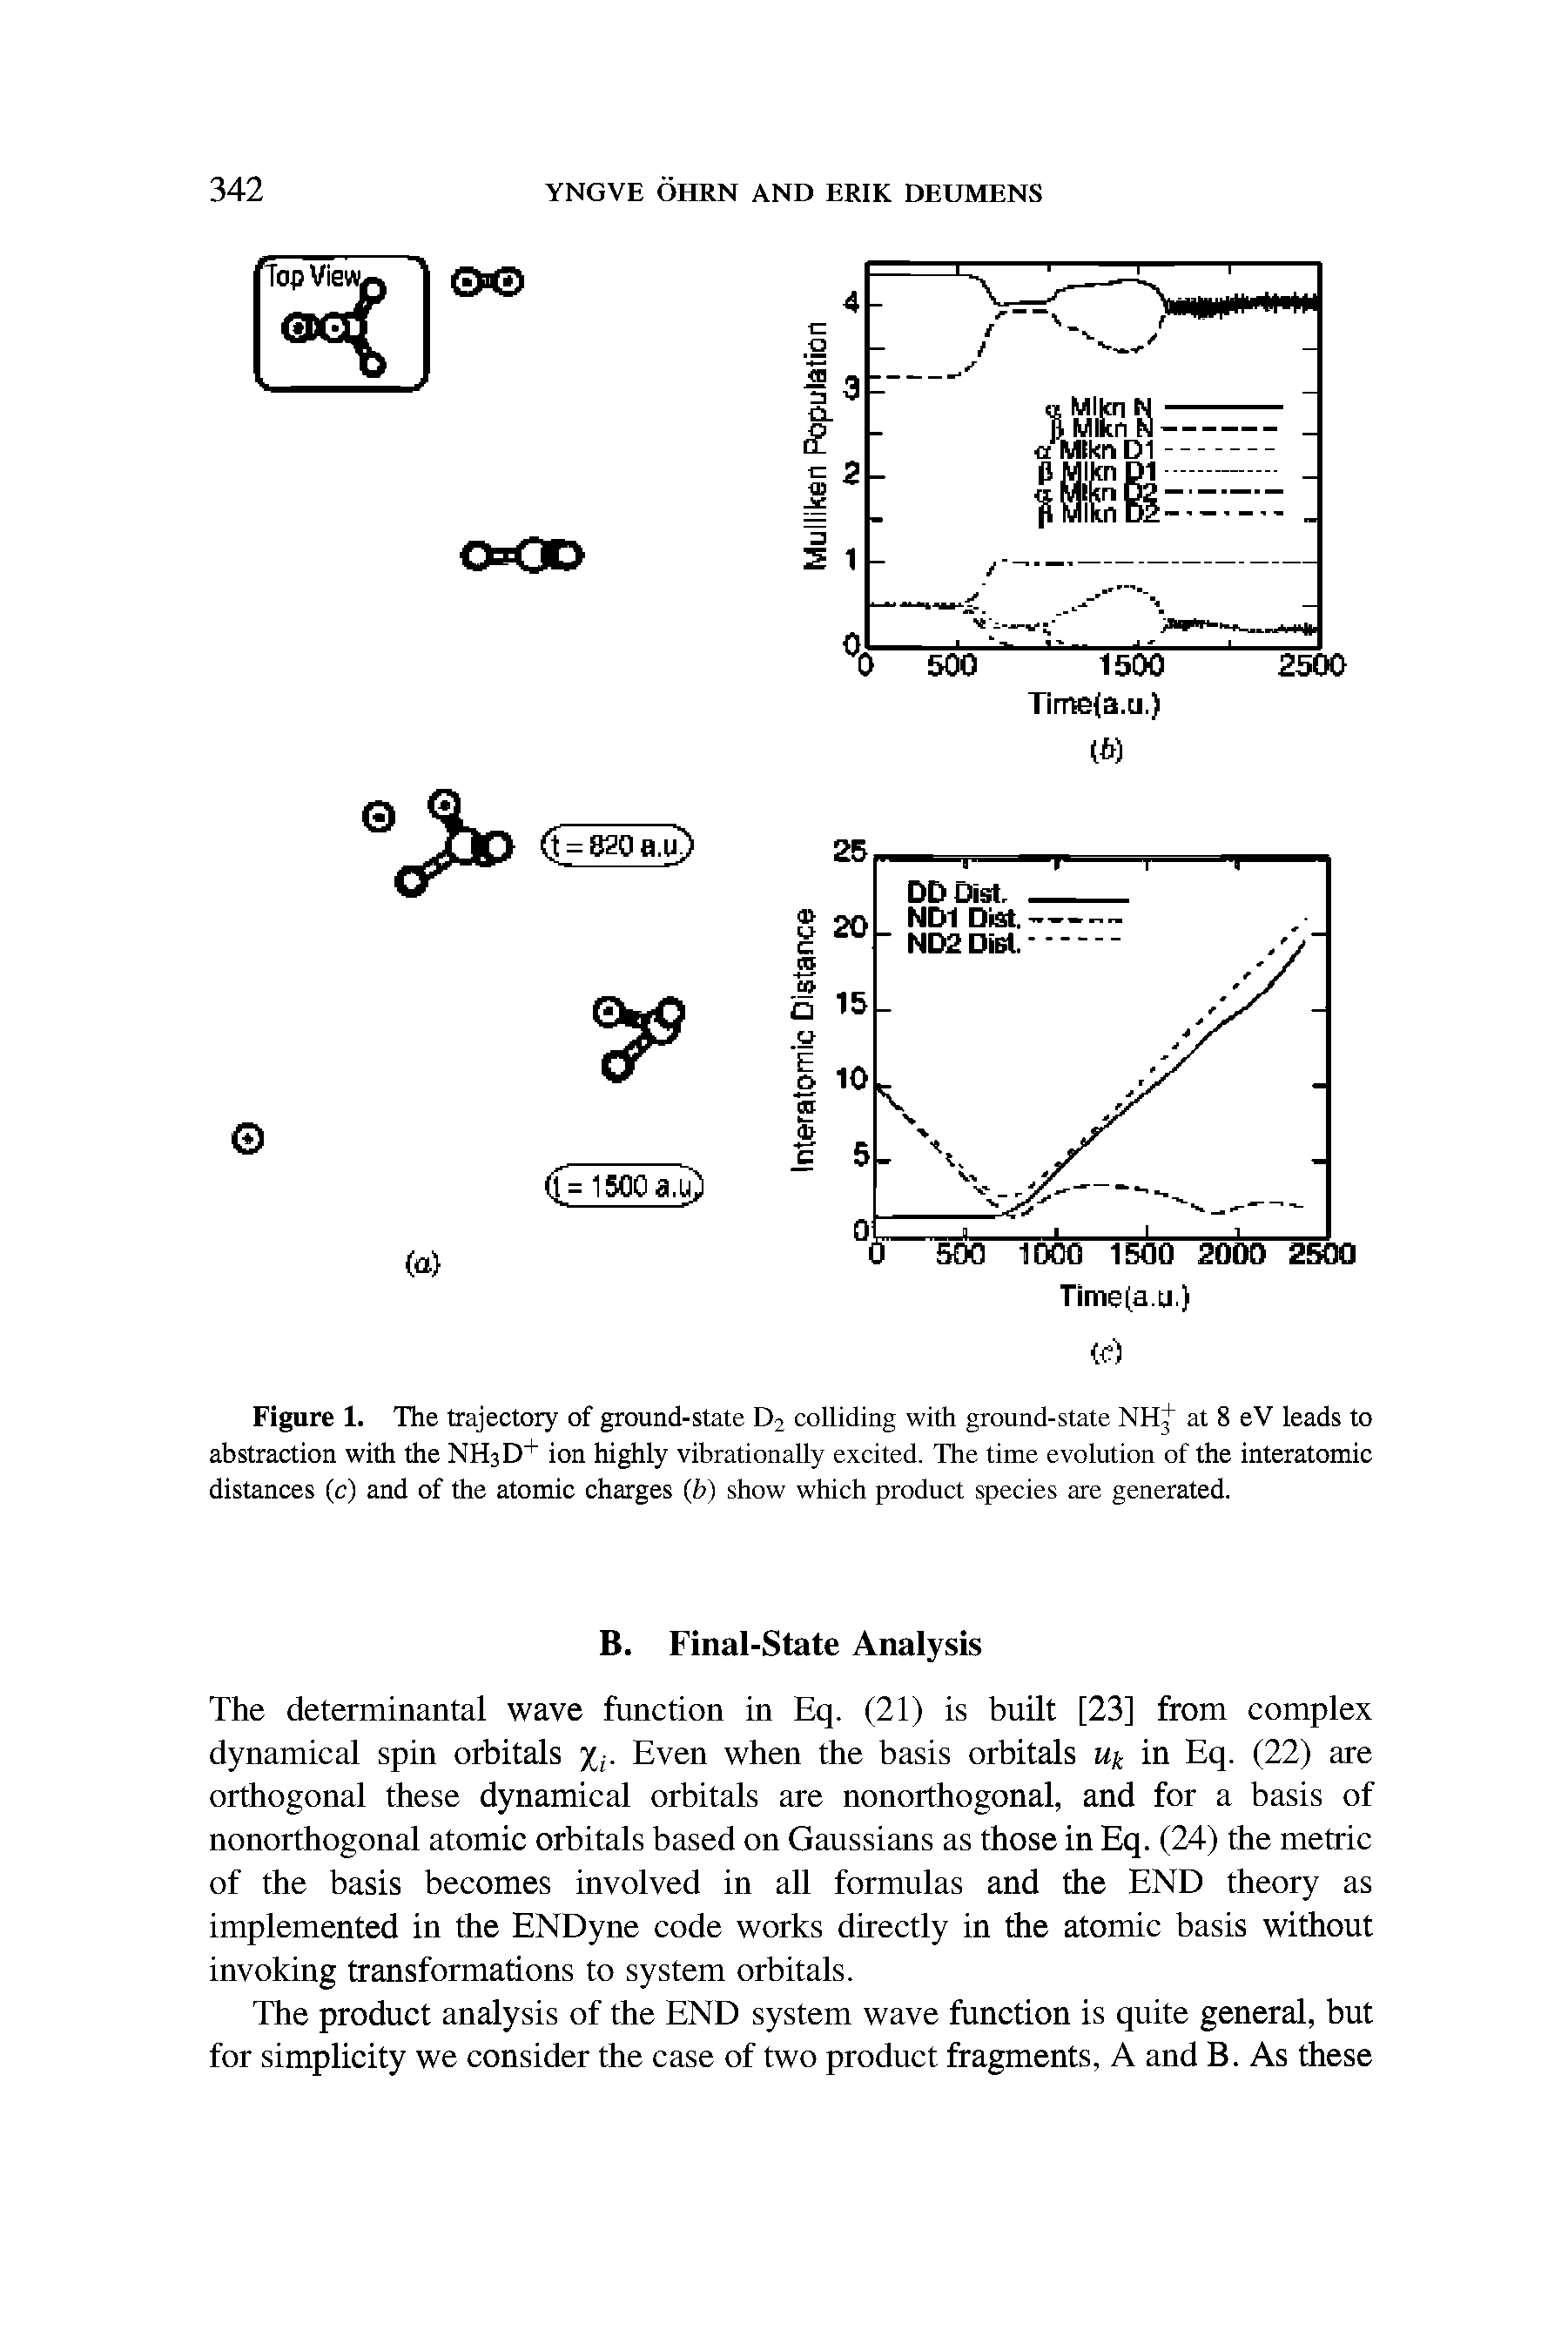 Figure 1. The trajectory of ground-state D2 colliding with ground-state NHj" at 8 eV leads to abstraction with the NHsD+ ion highly vibrationally excited. The time evolution of the interatomic distances (c) and of the atomic charges (b) show which product species are generated.